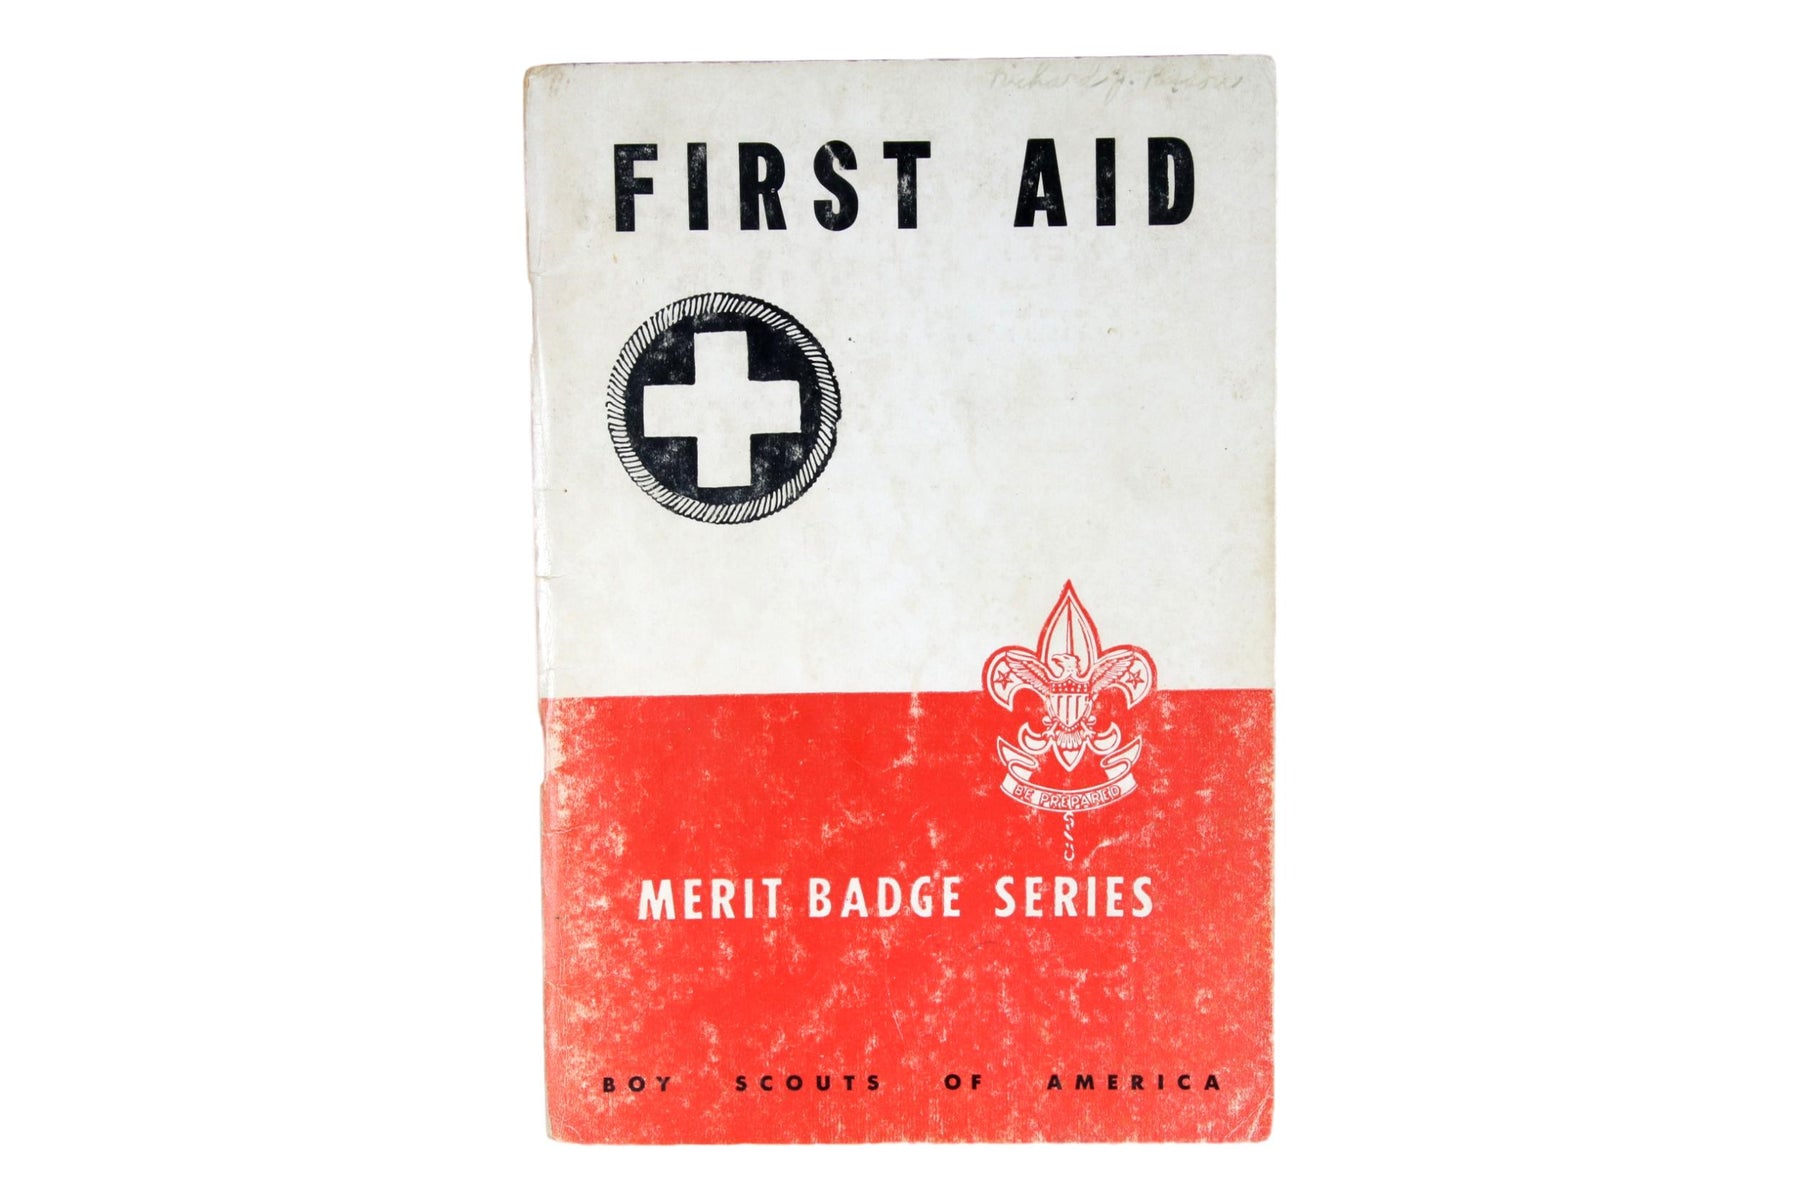 First Aid MBP 1950